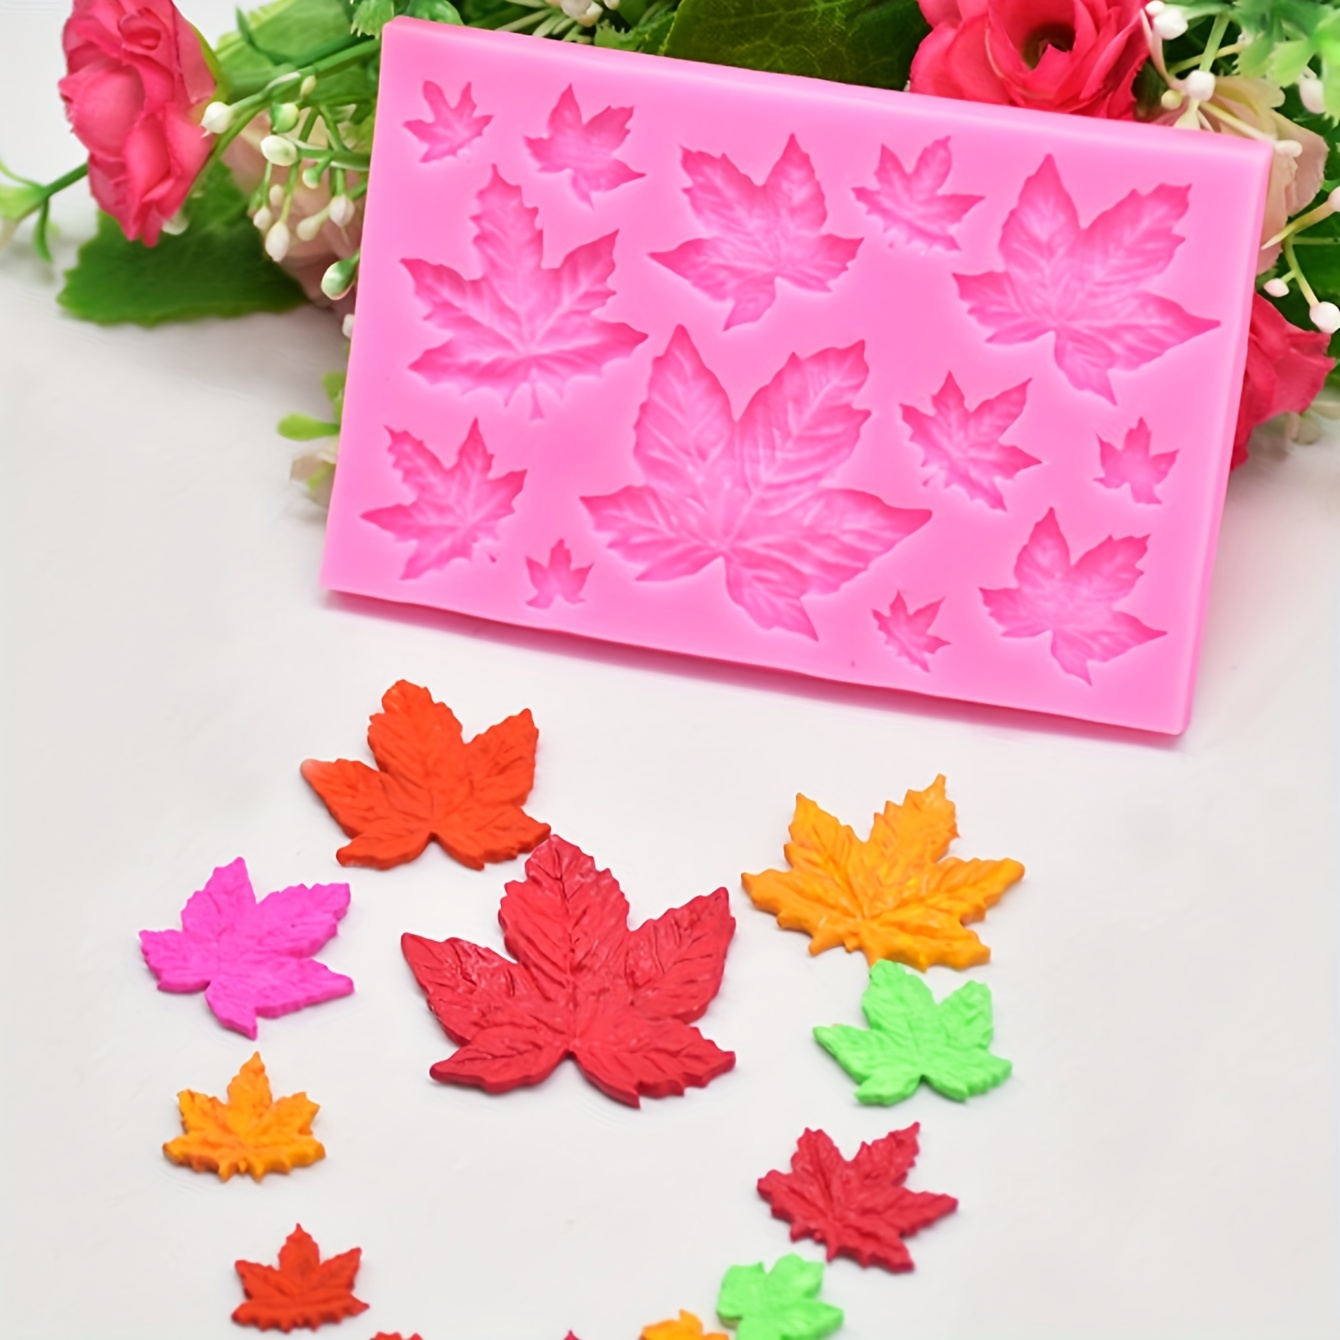 3D Leaf Shaped Pastry Silicone Molds Japanese Style Leaves Dessert